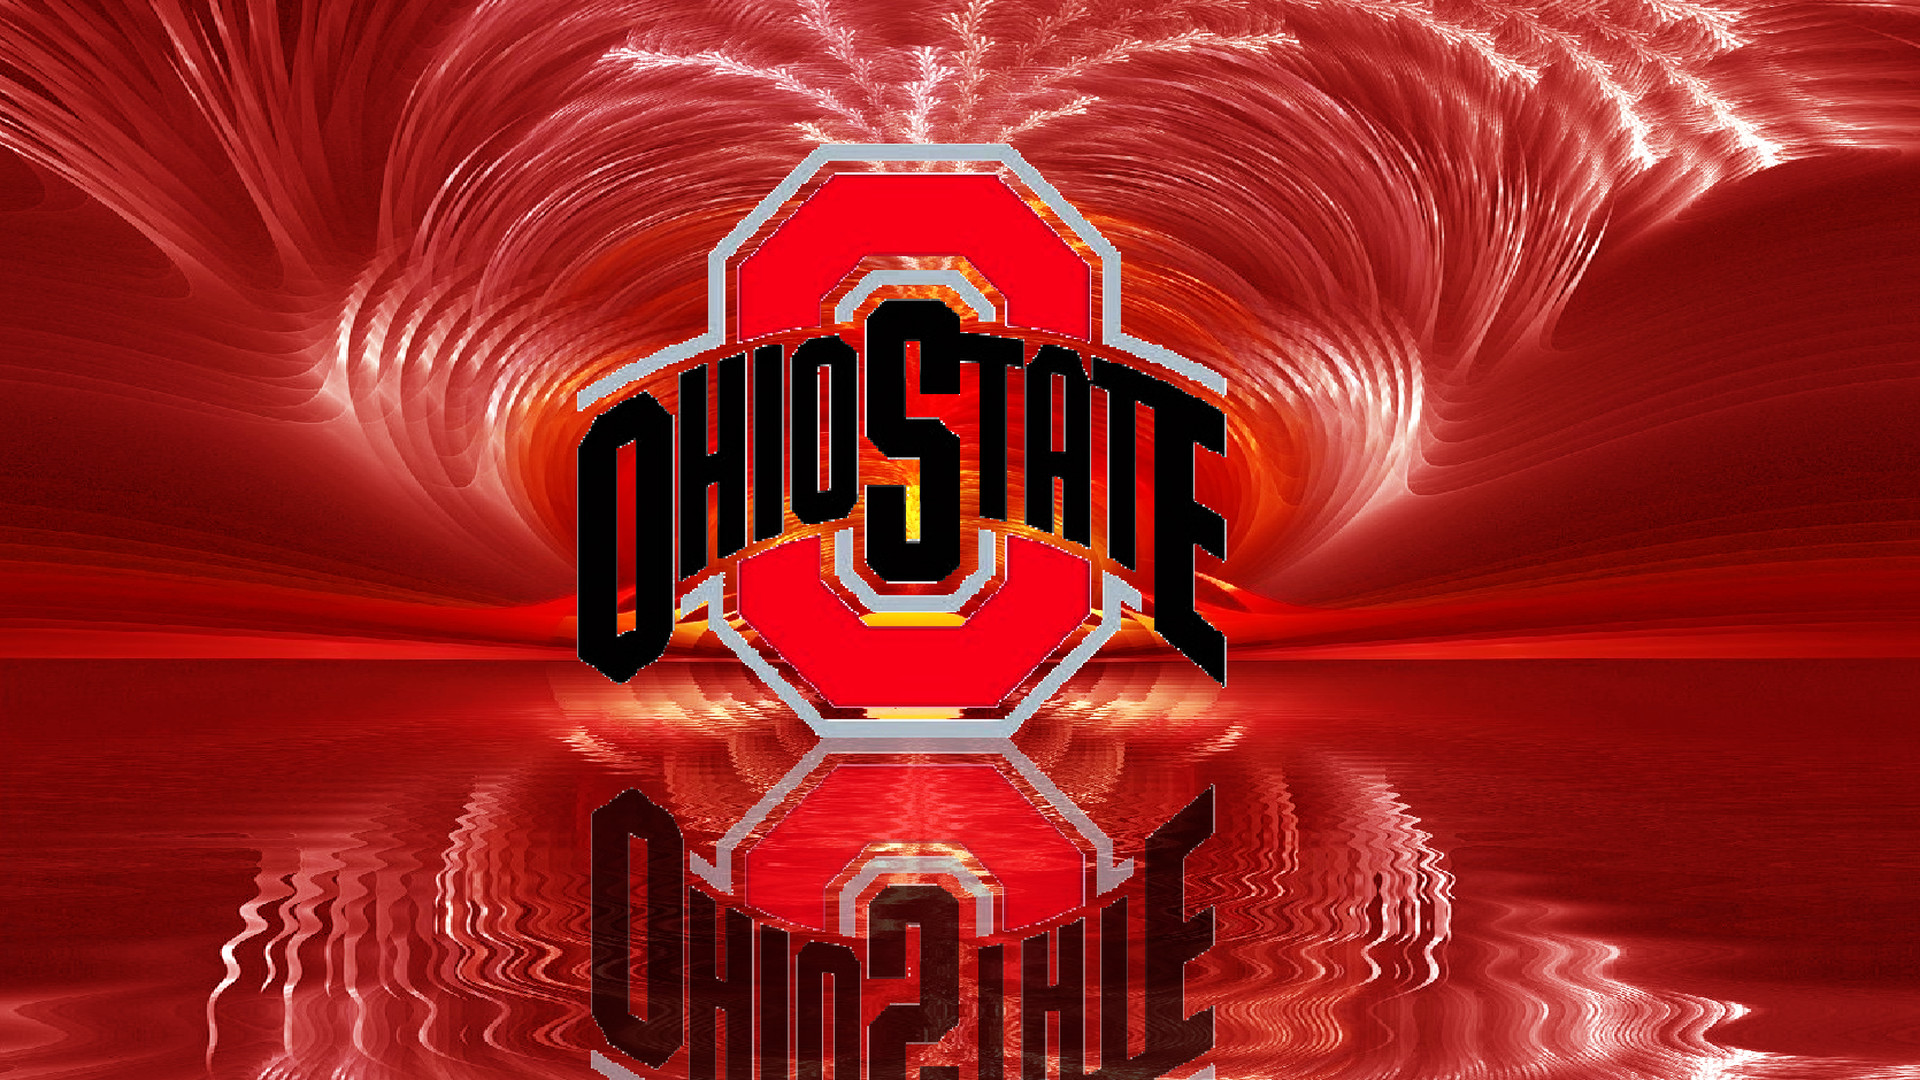 1920x1080 Ohio State Buckeyes images 2013 ATHLETIC LOGO #3 HD wallpaper and  background photos